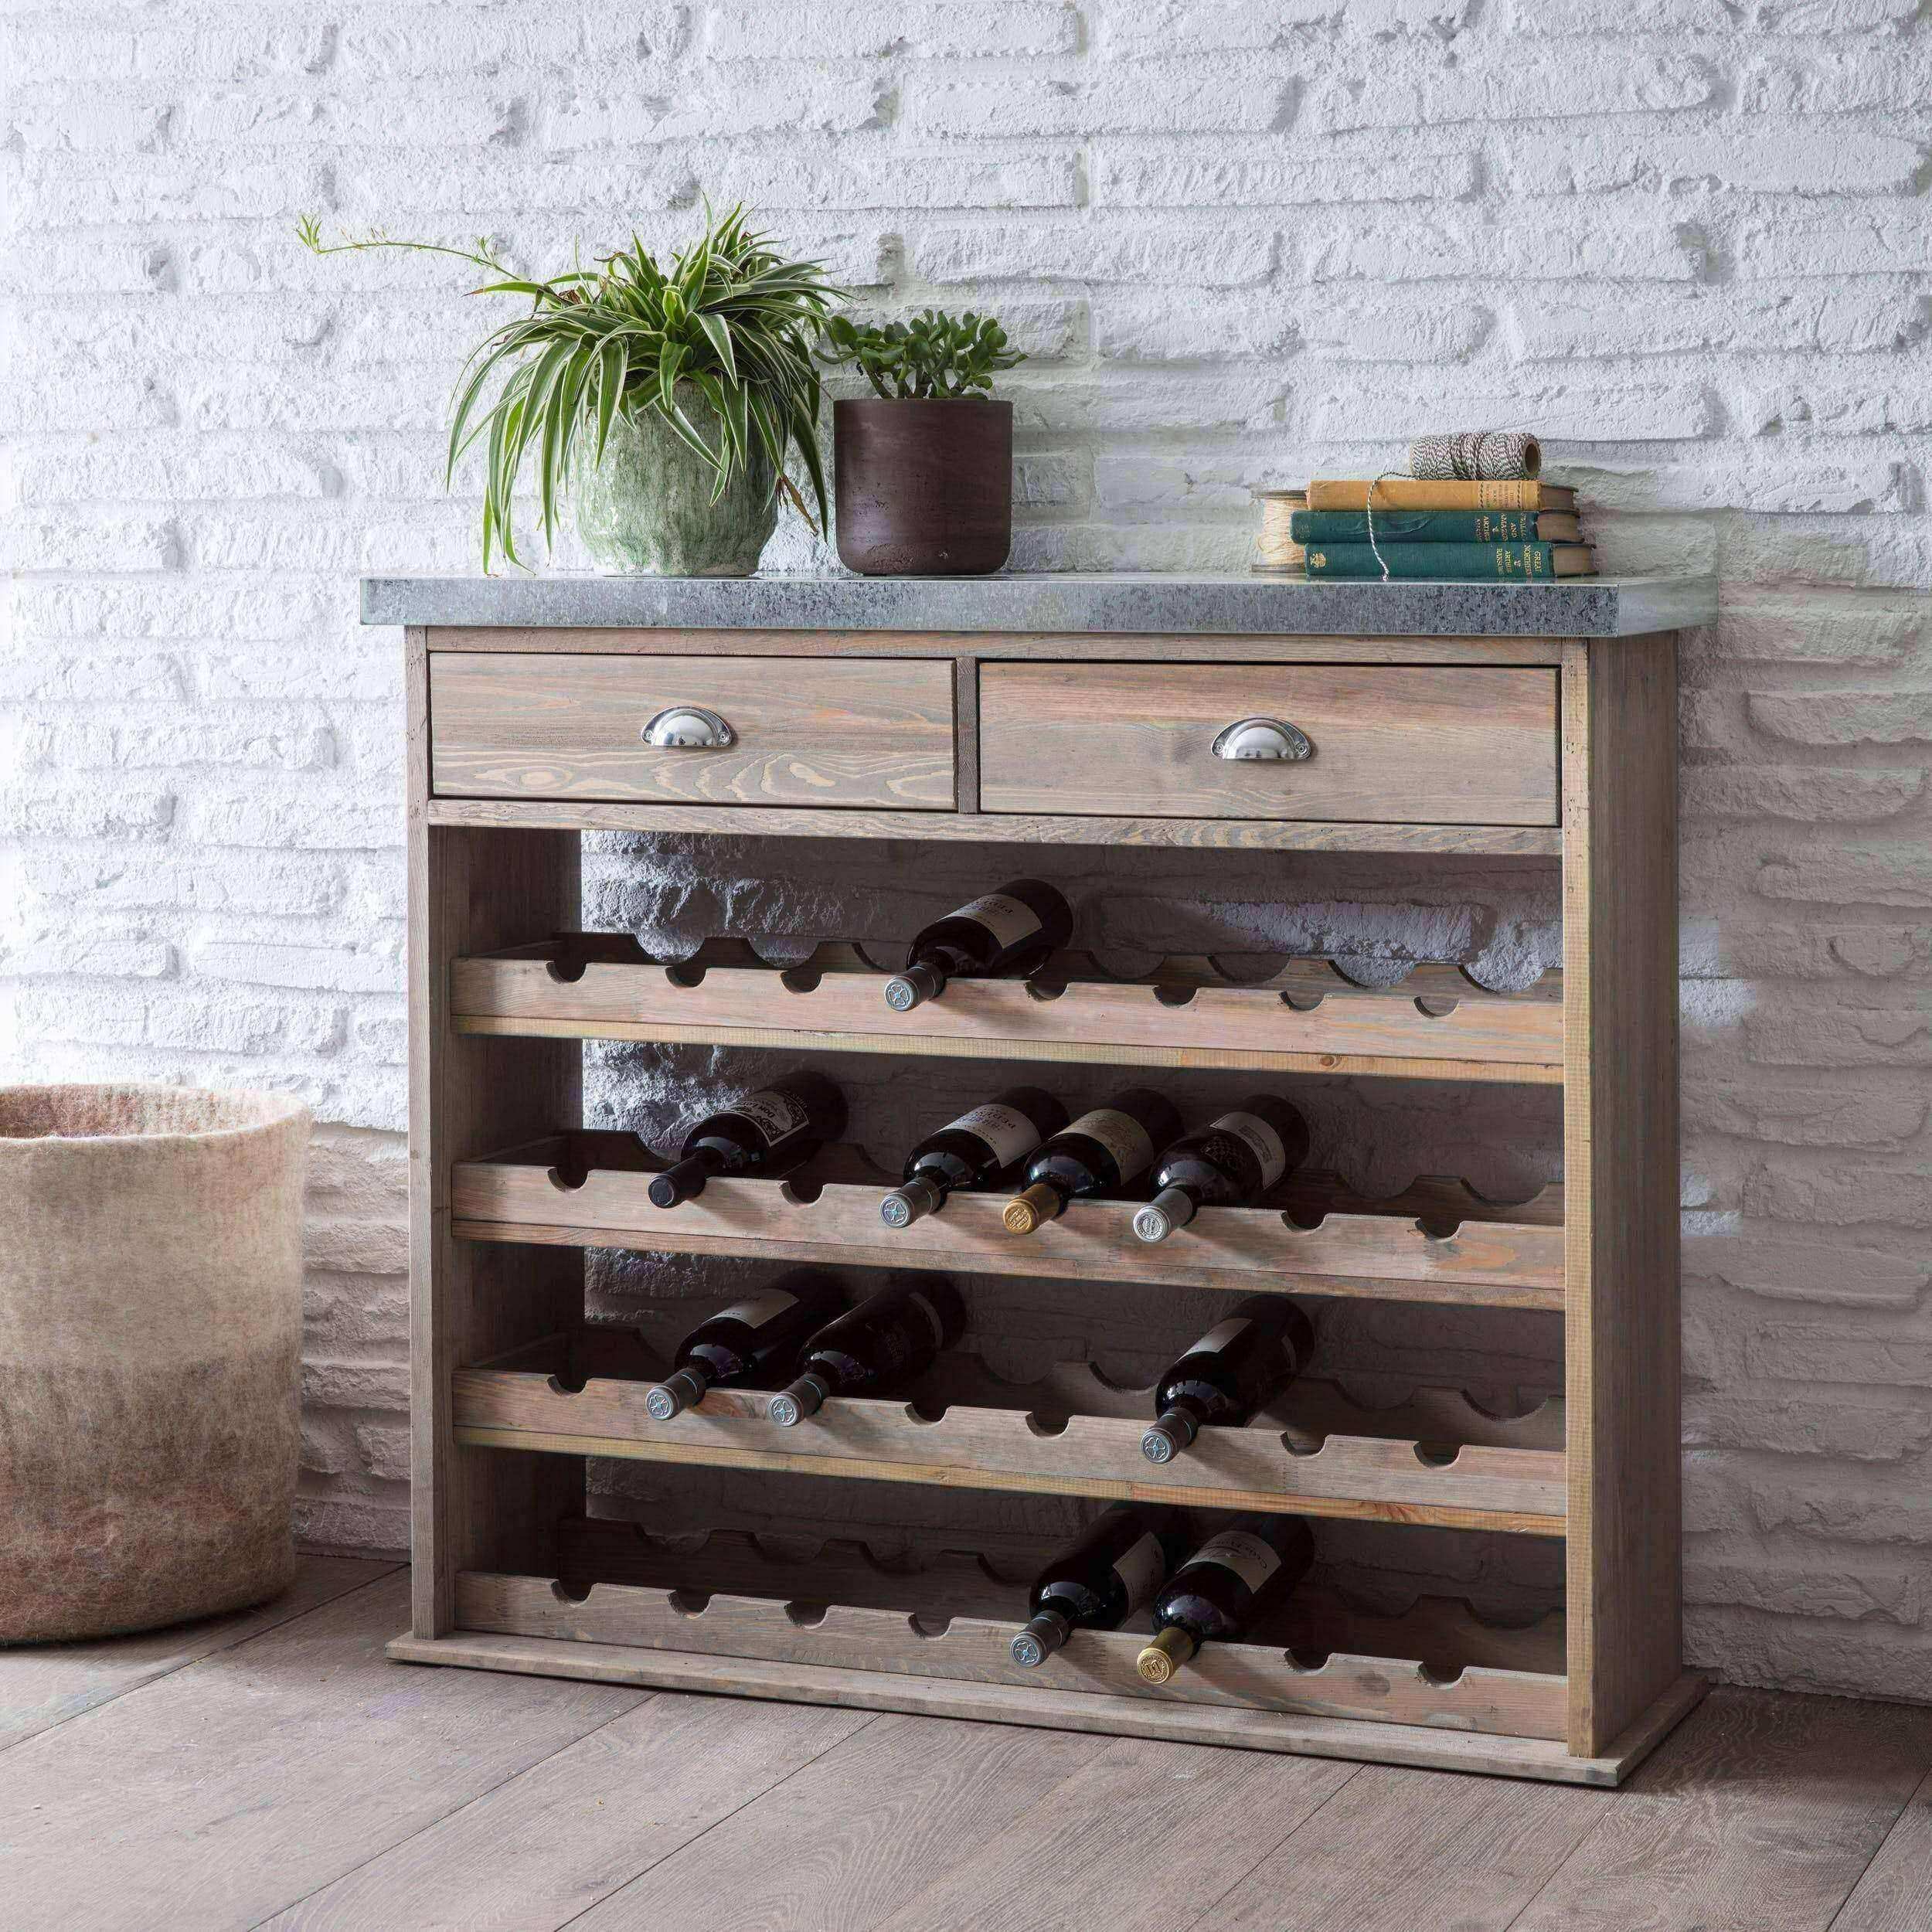 Rustic Wood & Metal Topped Wine Store Console - The Farthing